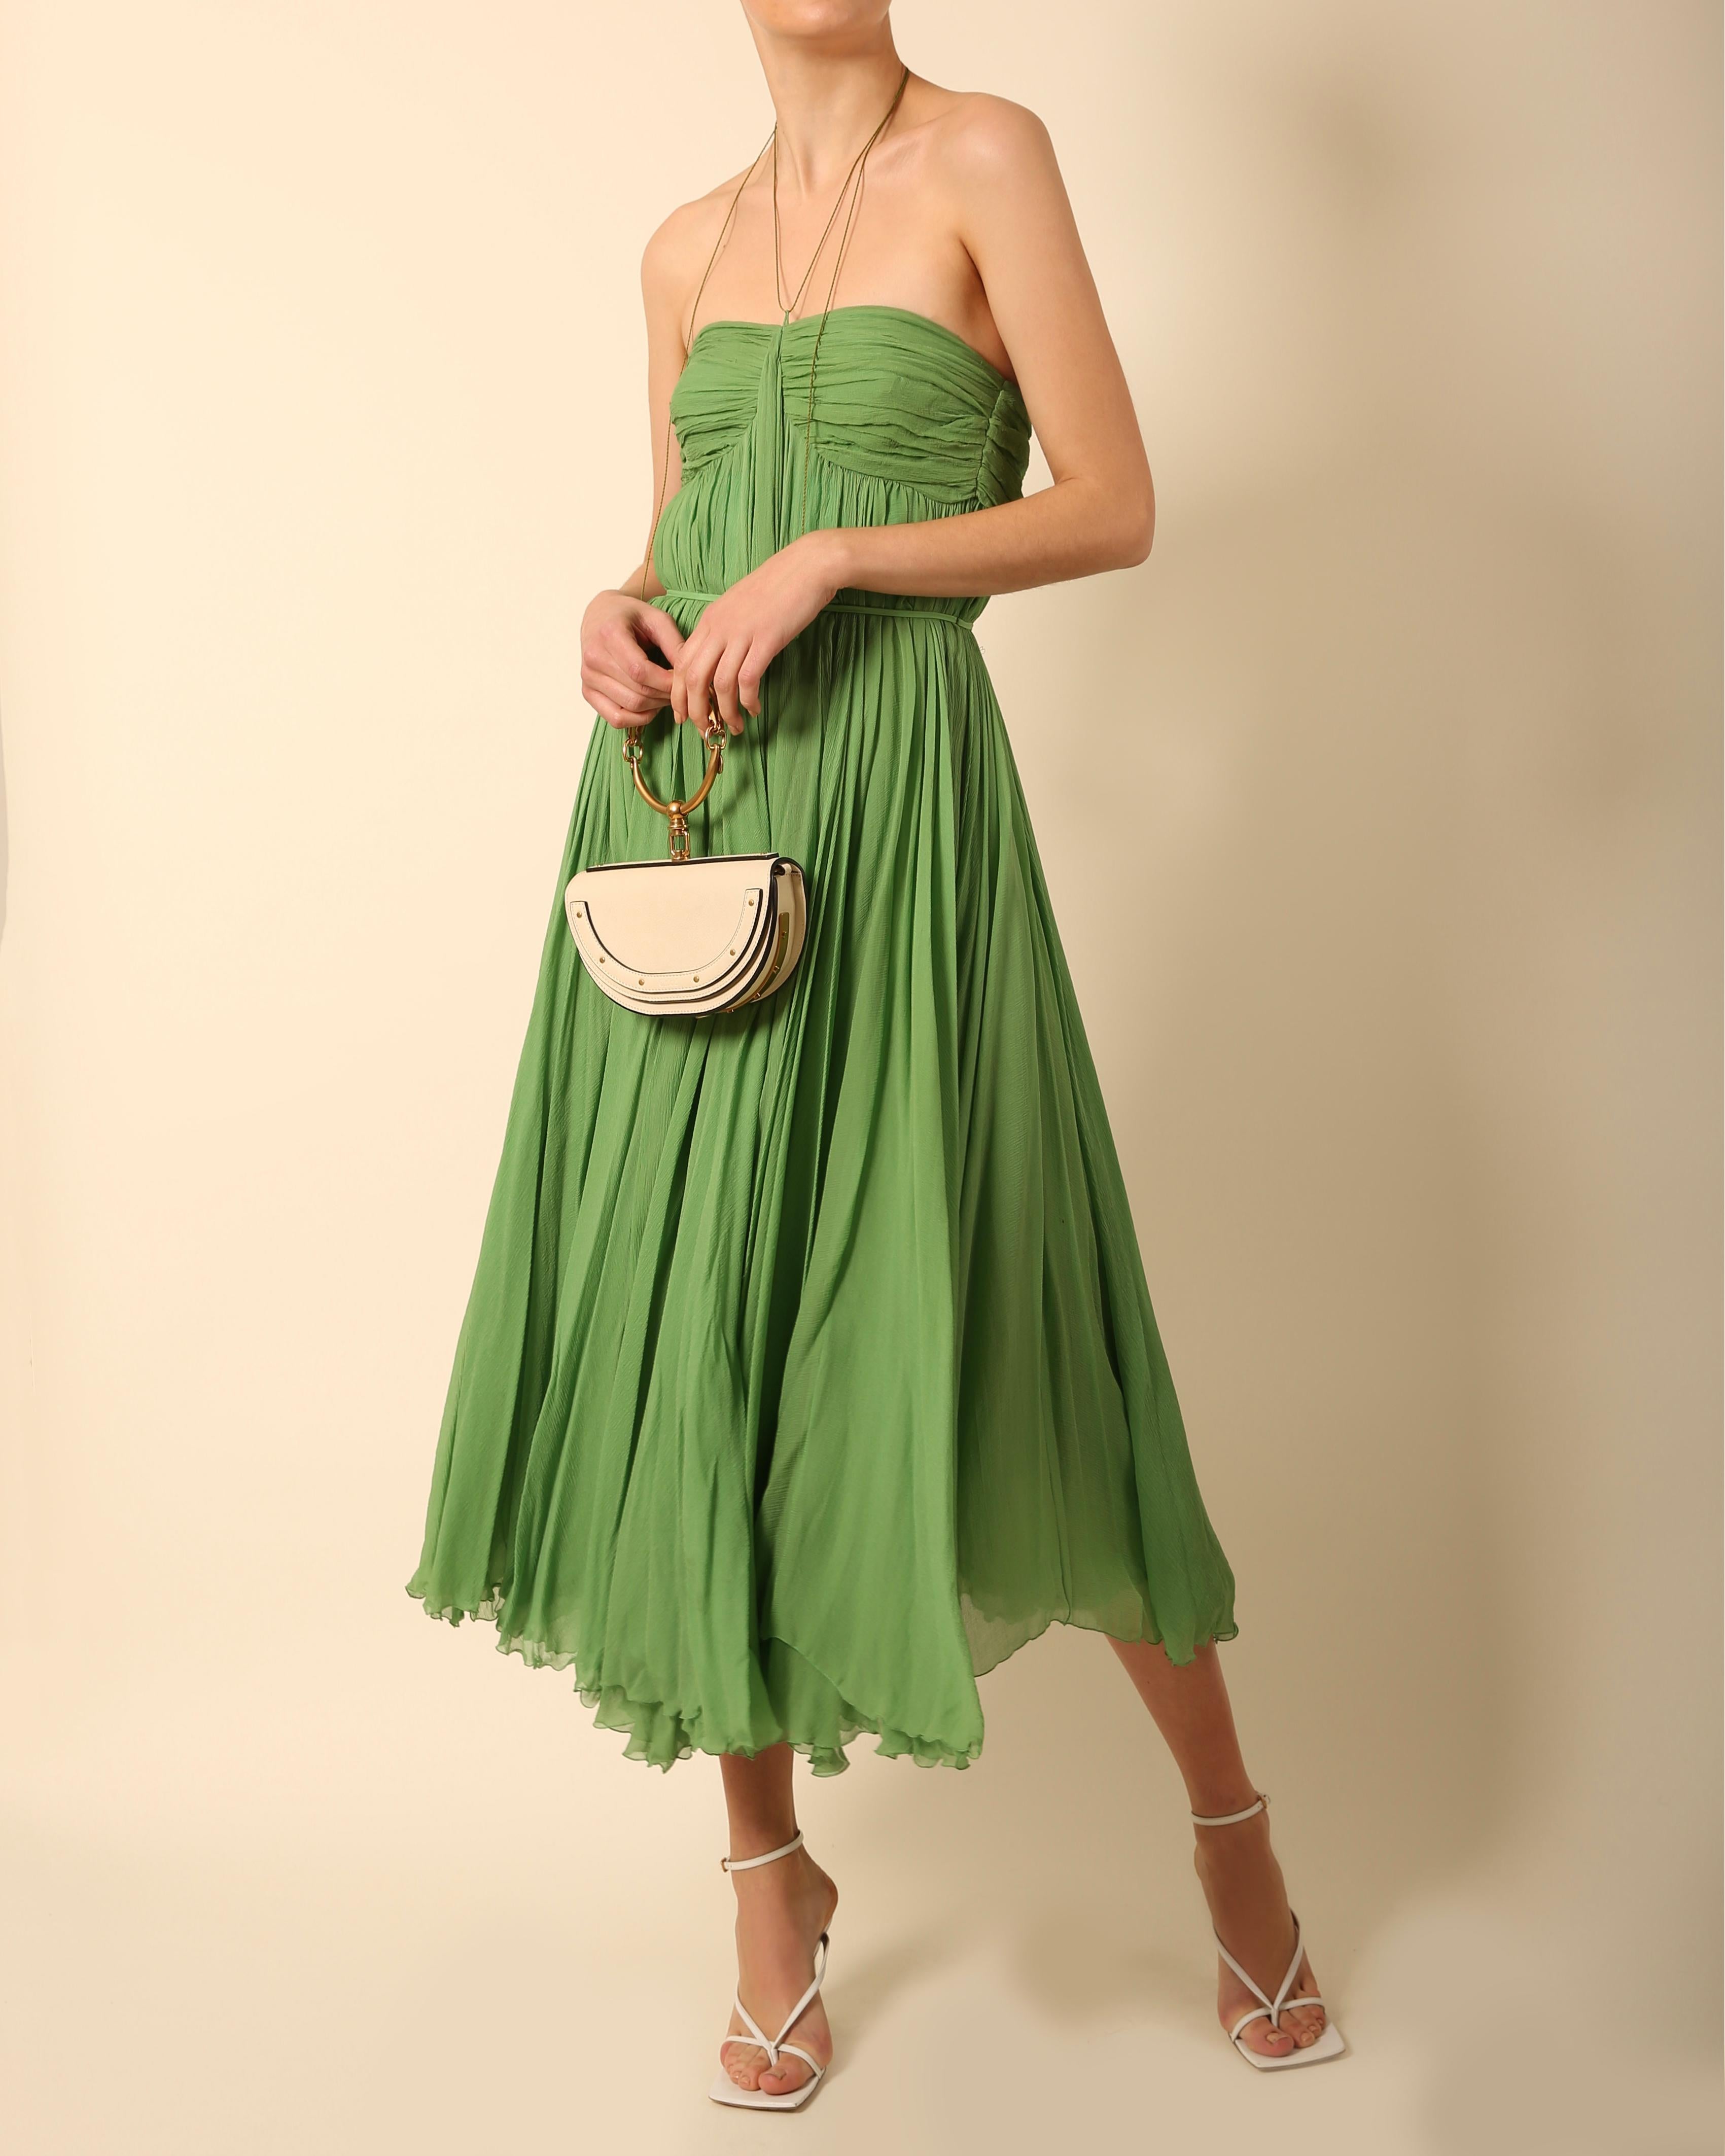 Chloe Spring Summer 2004 strapless plisse green silk dress
Boning to the upper portion
Cinched in waist
Long rope ties with beaded ends wrap around the neck as seen on the runway
Concealed back zip

Composition:
100% Silk

Size:
Marked a FR 38,